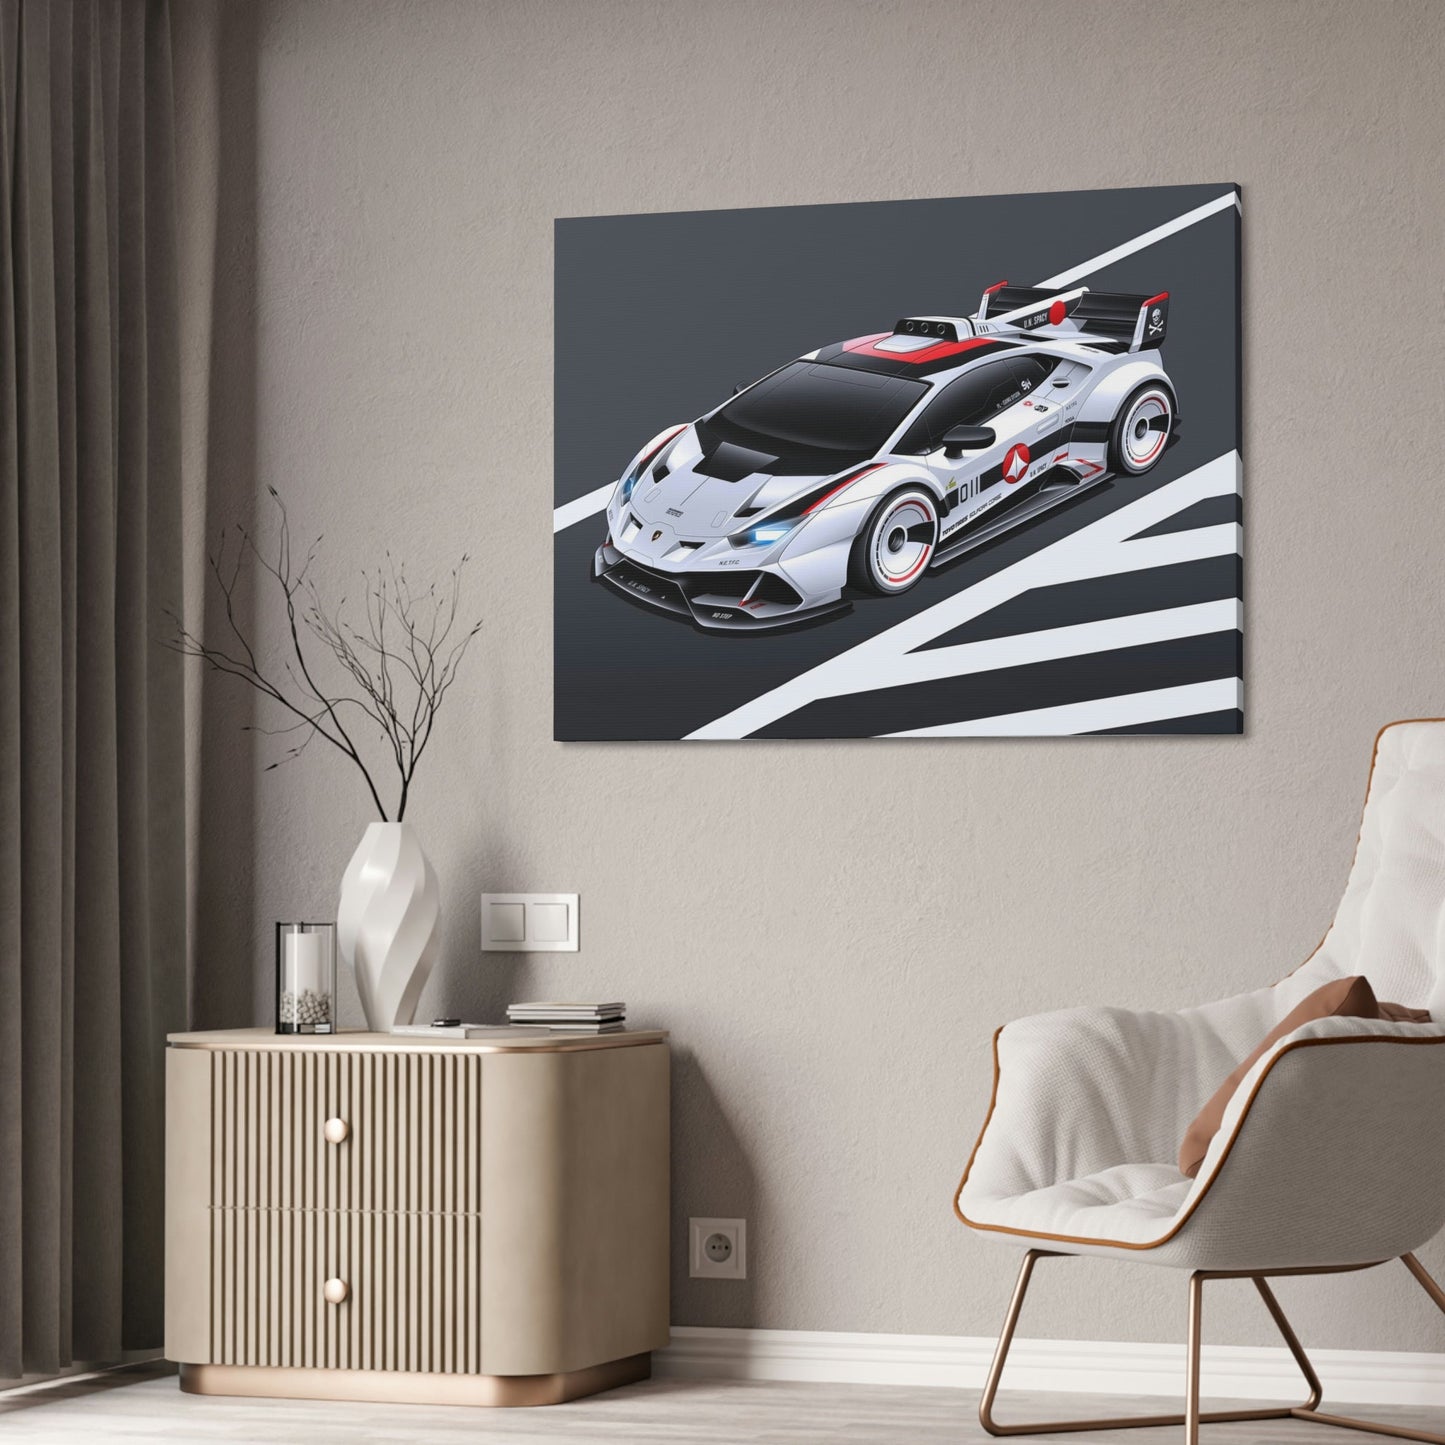 Luxury on Wheels: Lamborghini Framed Poster & Canvas and Wall Art